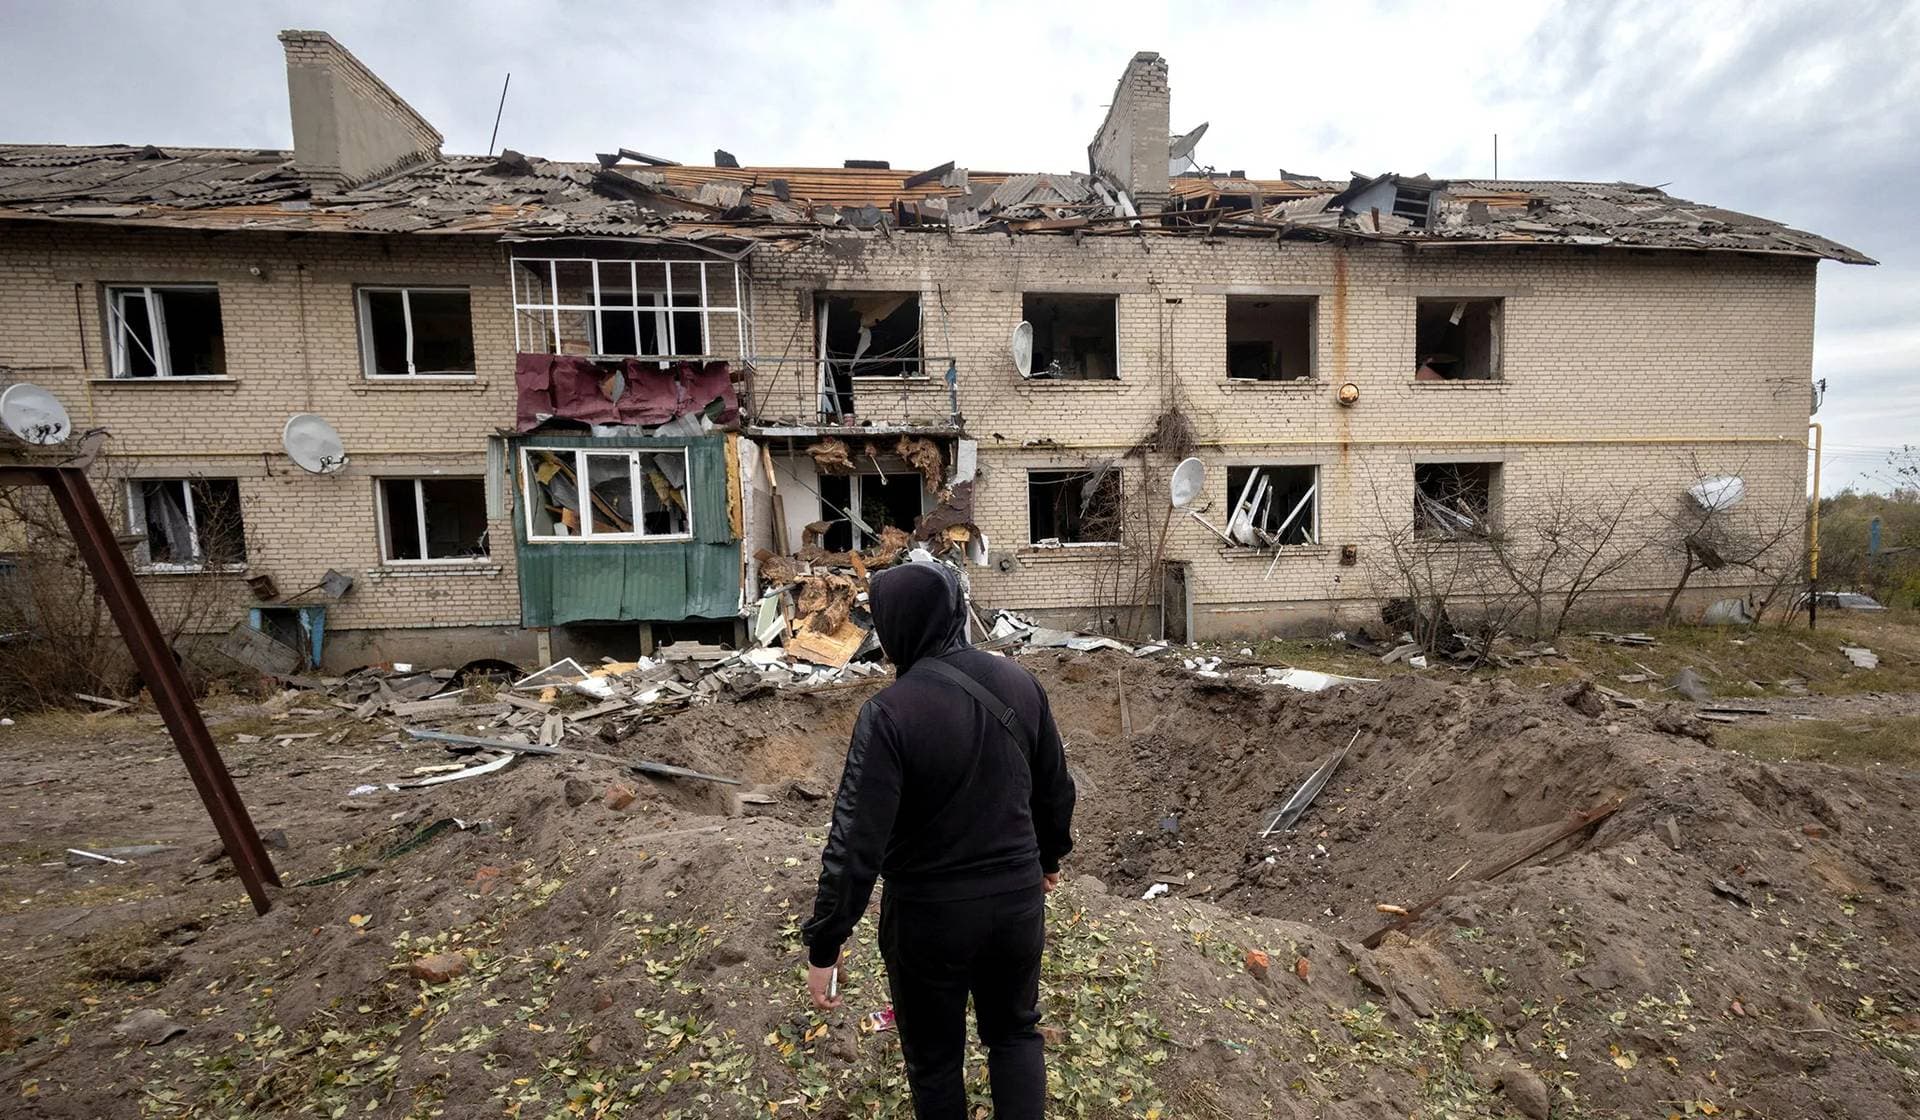 A man looks at the impact crater of a Russian S-300 missile next to an apartment building in Peresichne